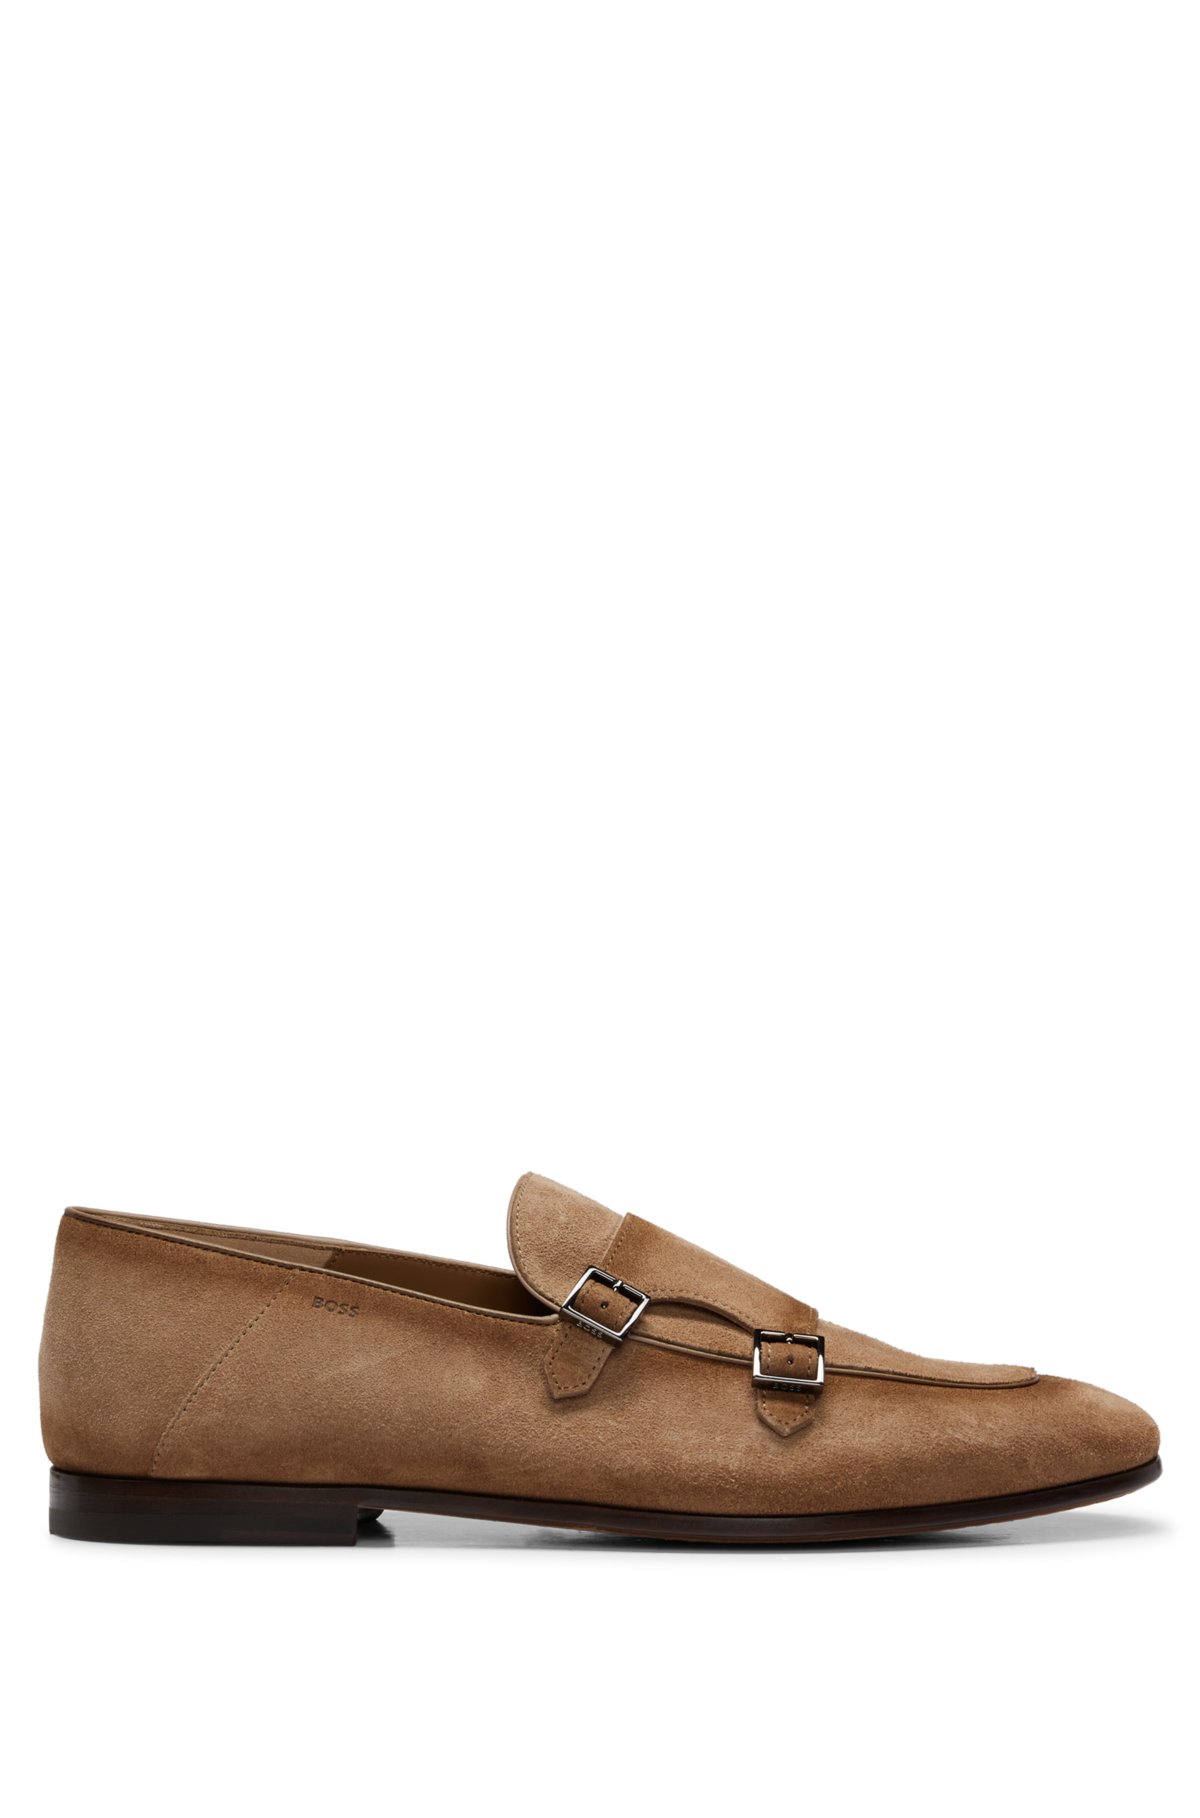 wees stil springen Pakket BOSS - Suede monk shoes with double strap and branding